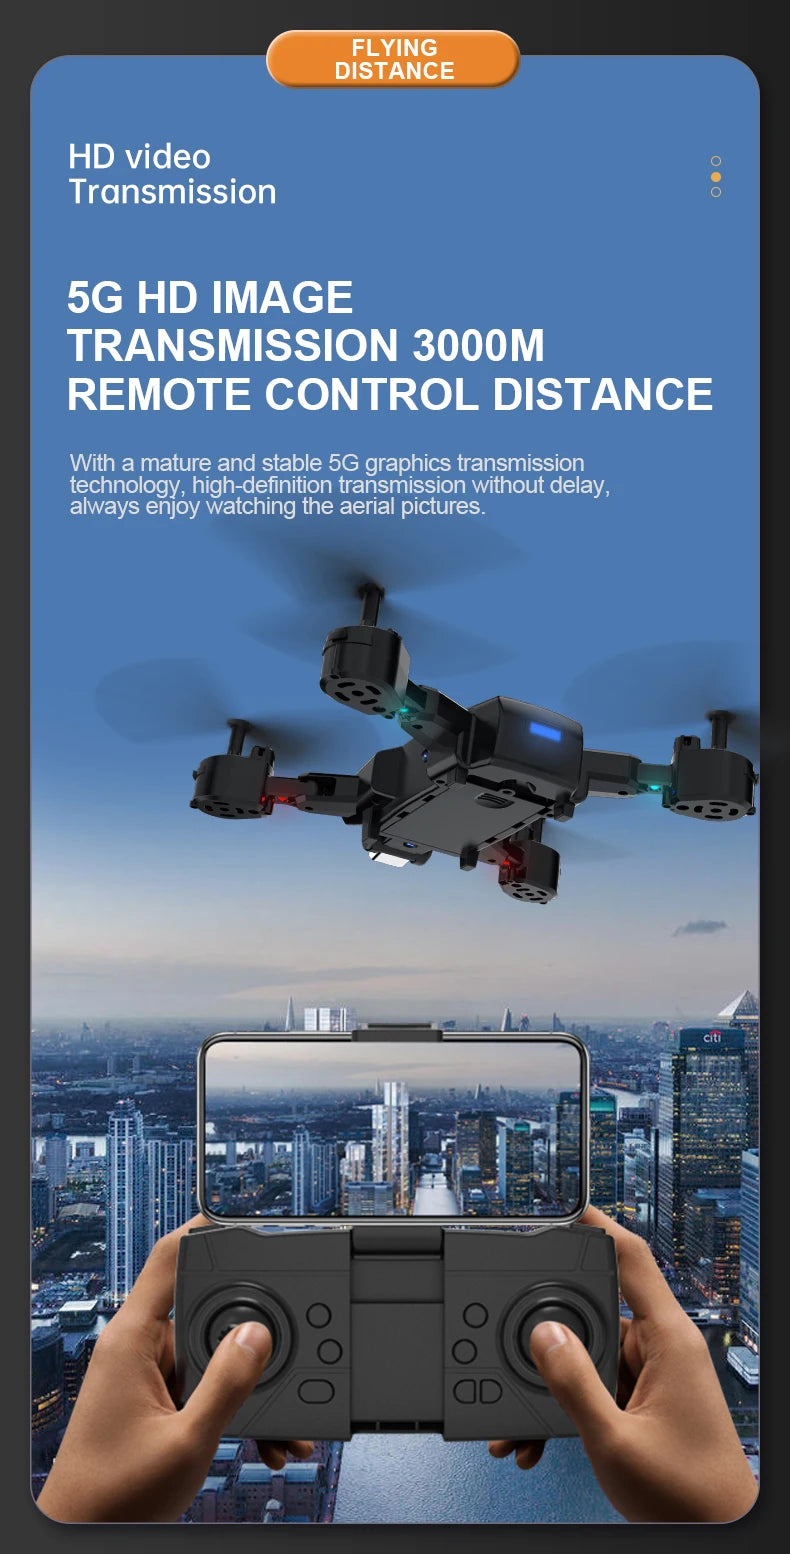 R2S Drone, 5g hd image transmission 3000m remote control distance with